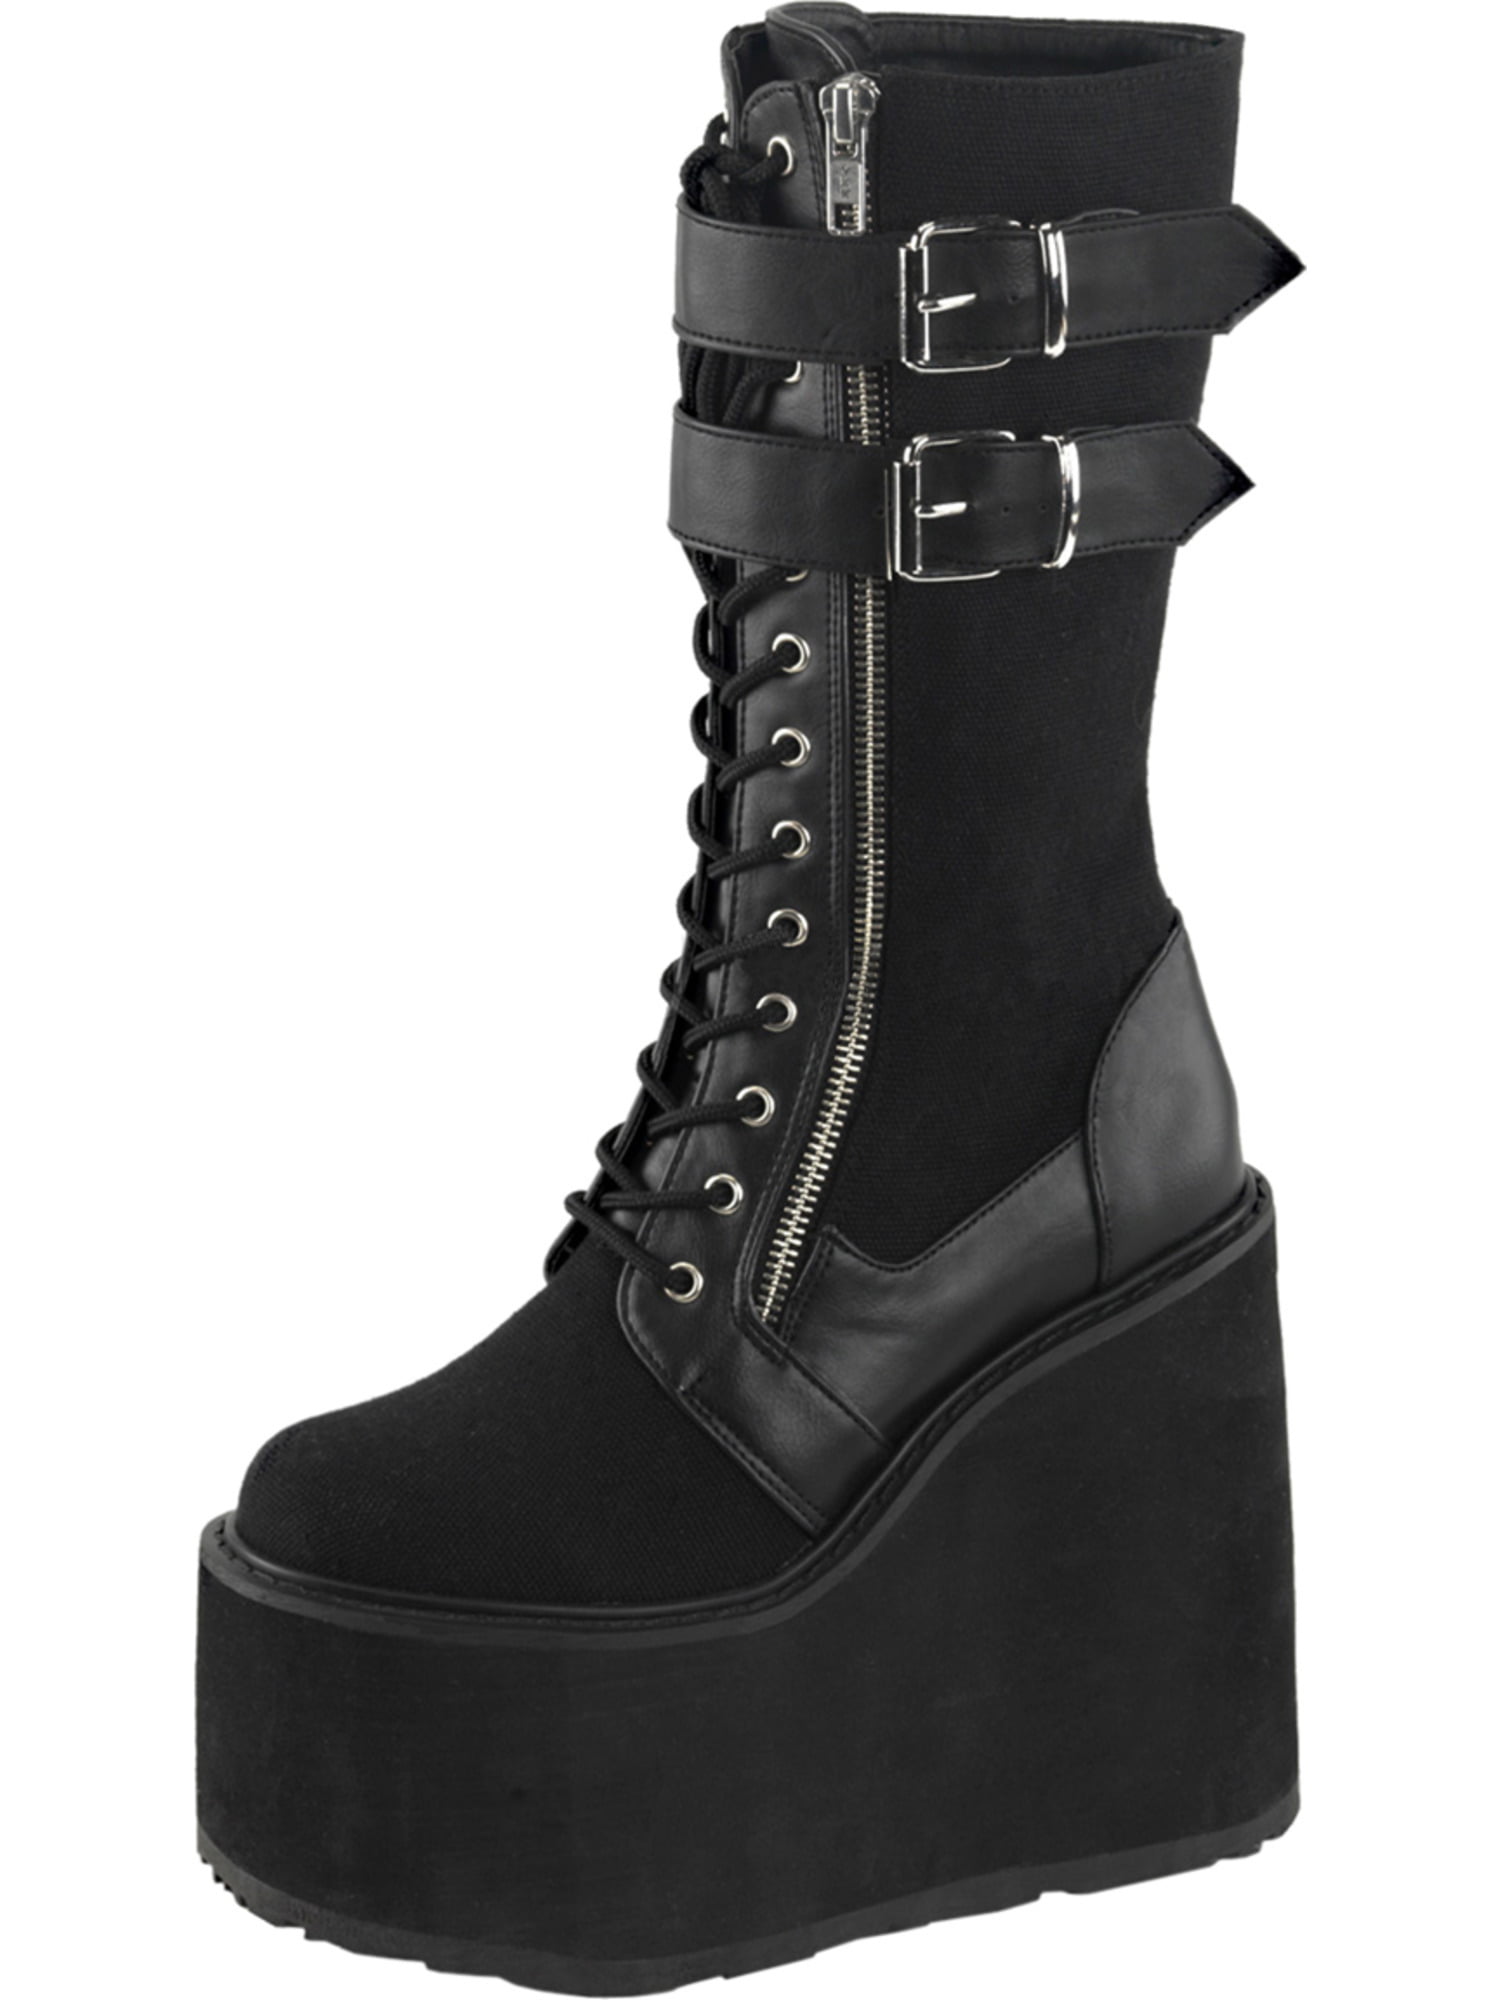 Demonia - Womens Lace Up Wedges Knee High Boots Black Platform Shoes 5 ...